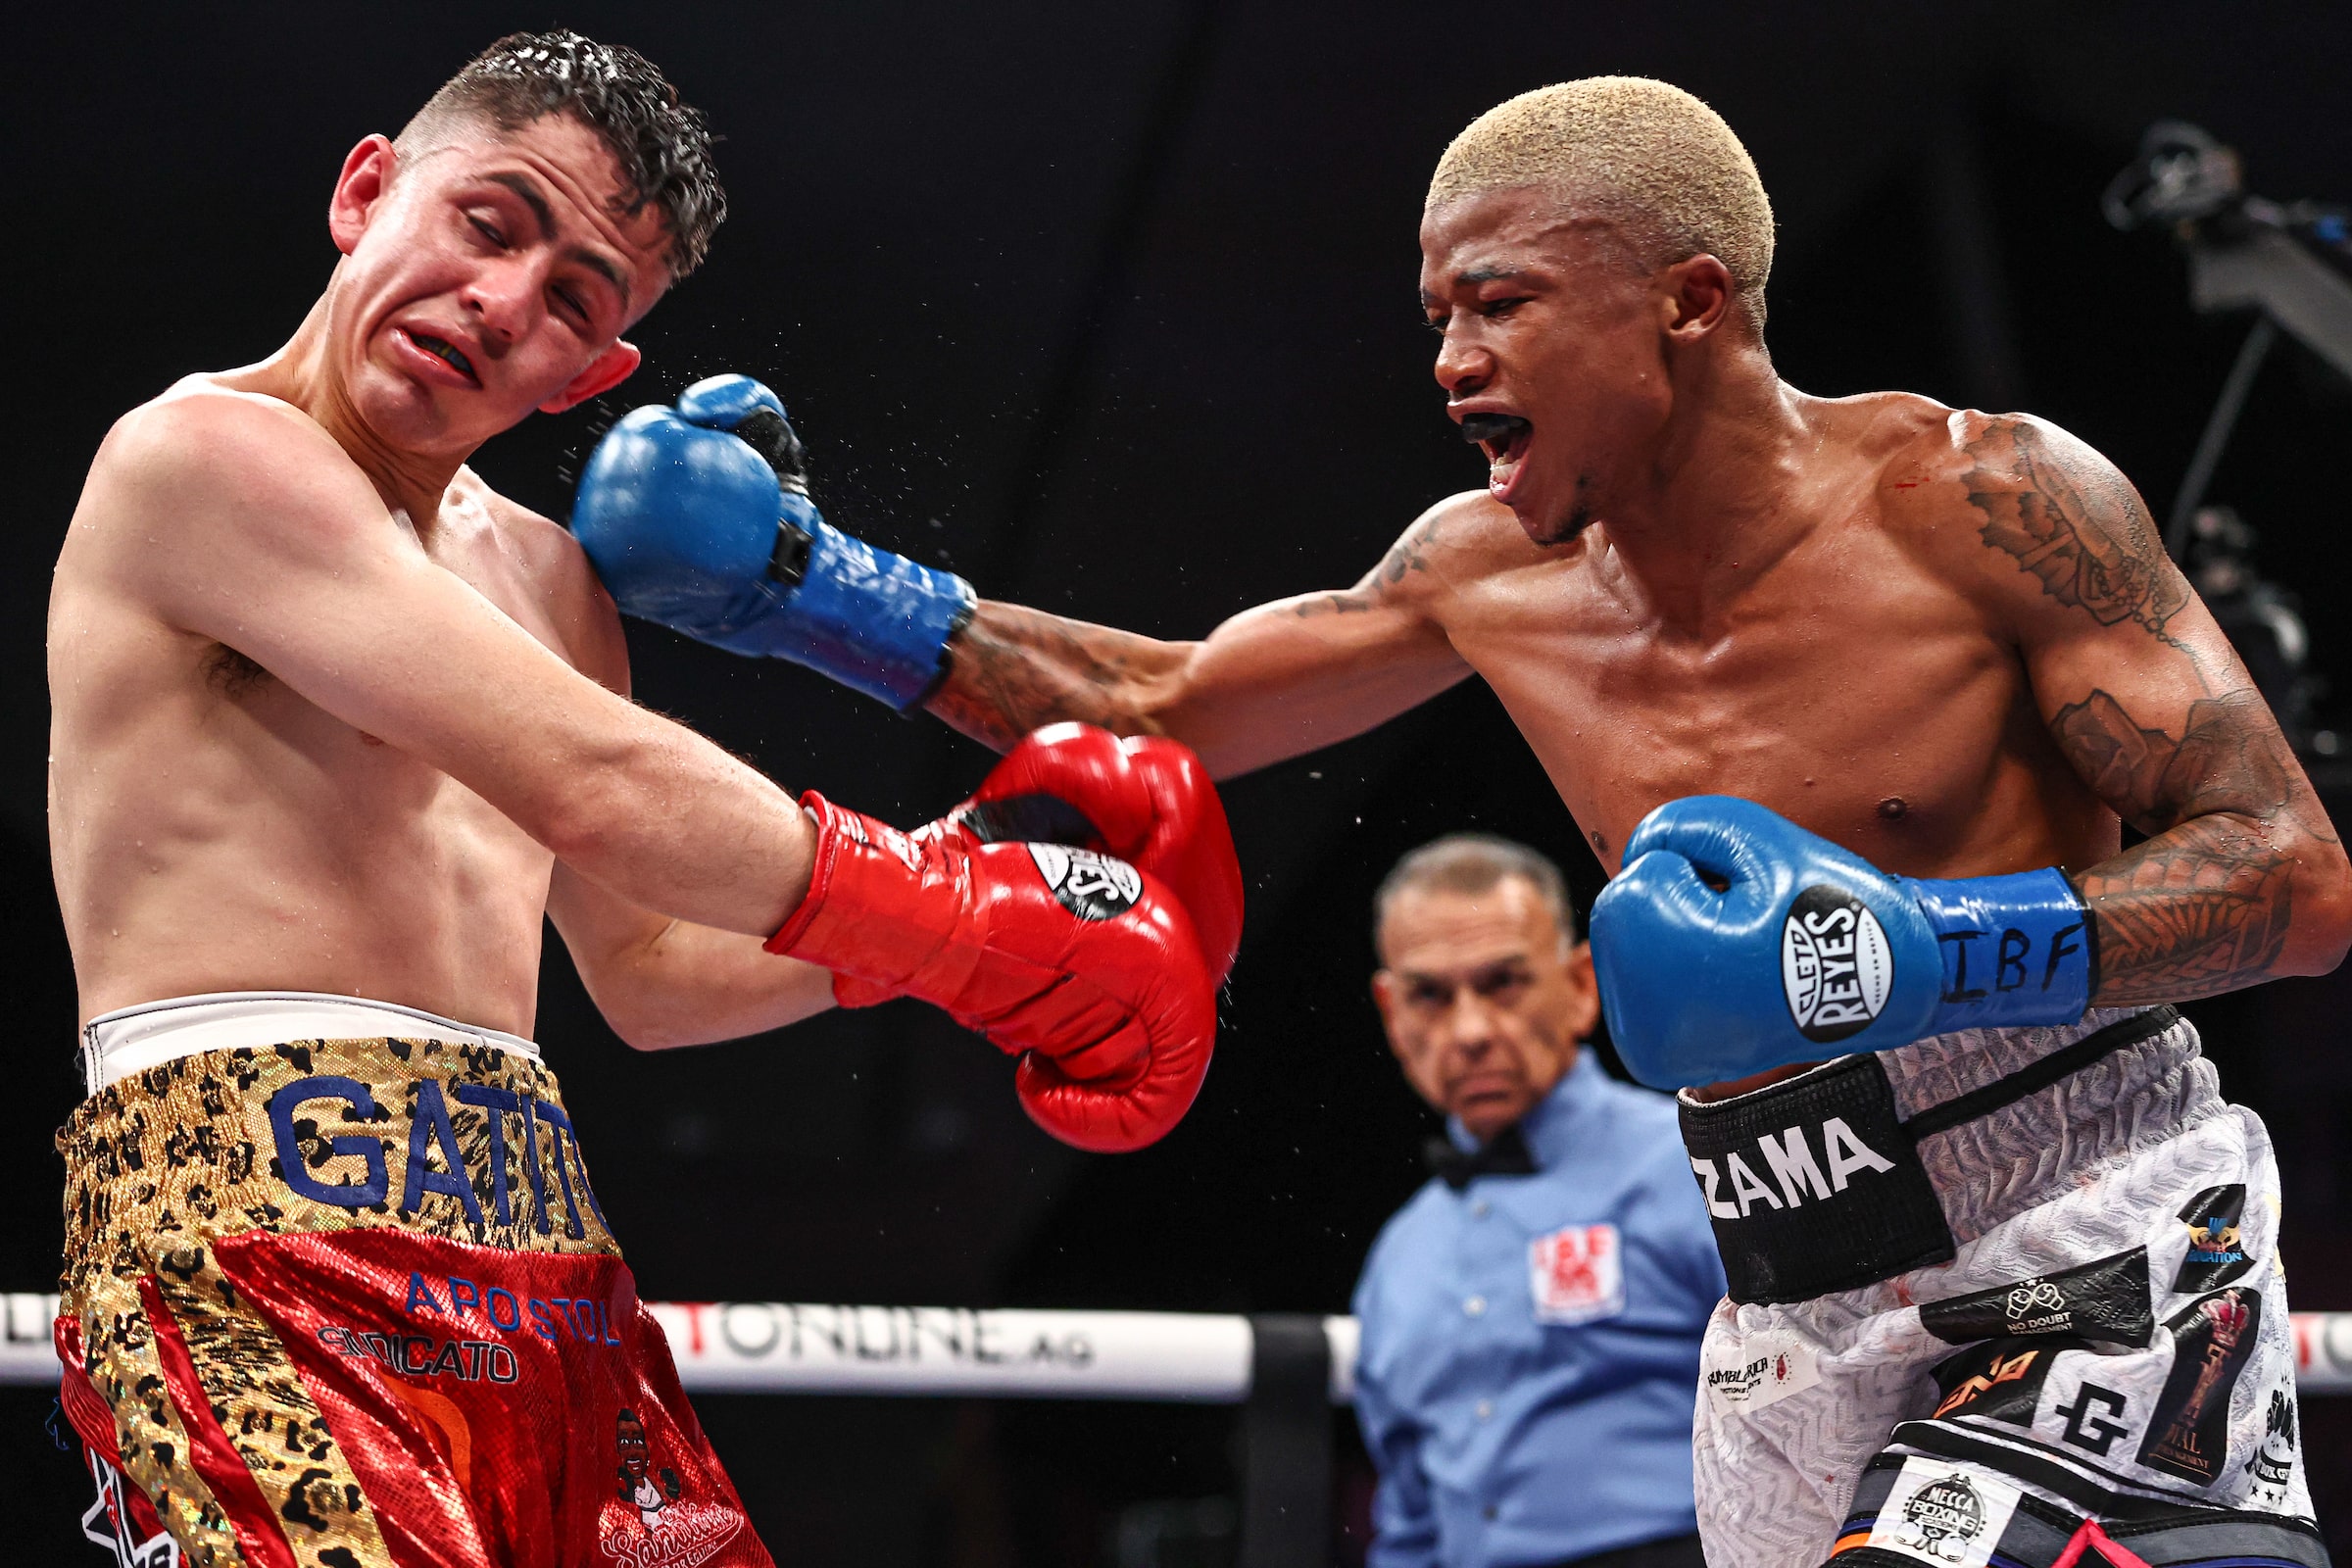 Nontshinga gains revenge over Curiel via stunning come-from-behind 10th-round KO